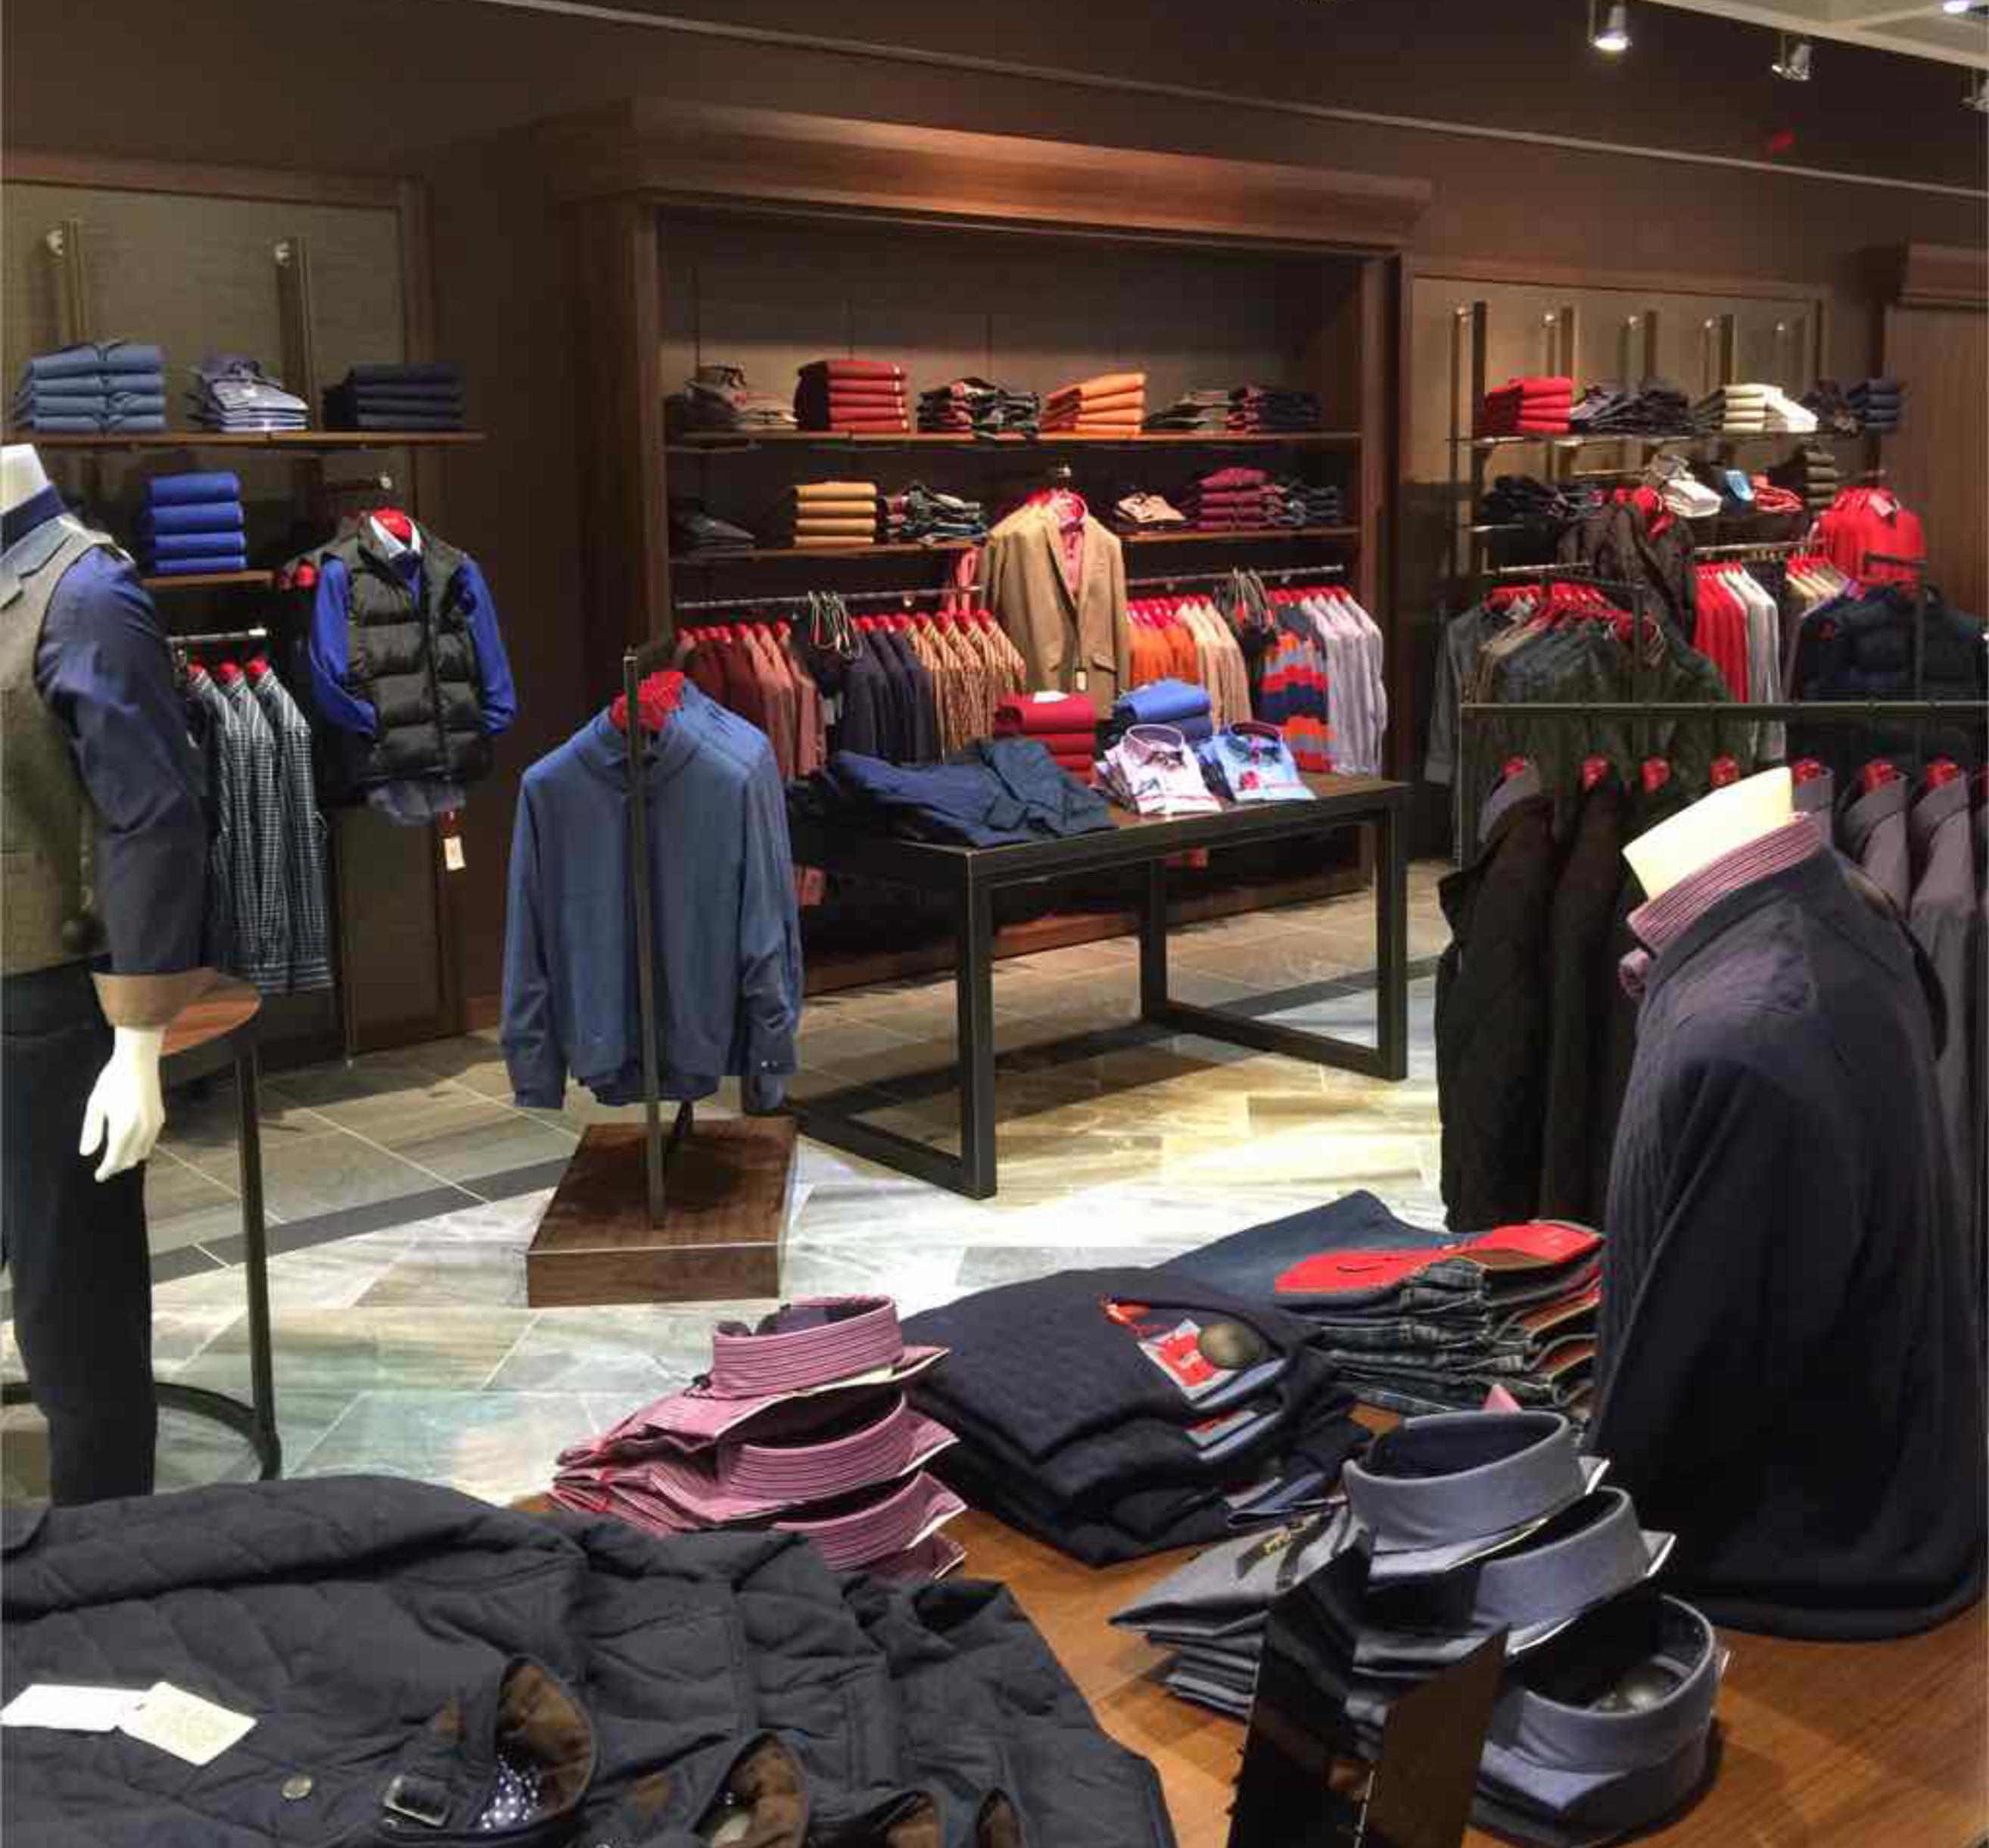 Menswear shirt and suit displays using Inset 4 and Recess 4 merchandising systems